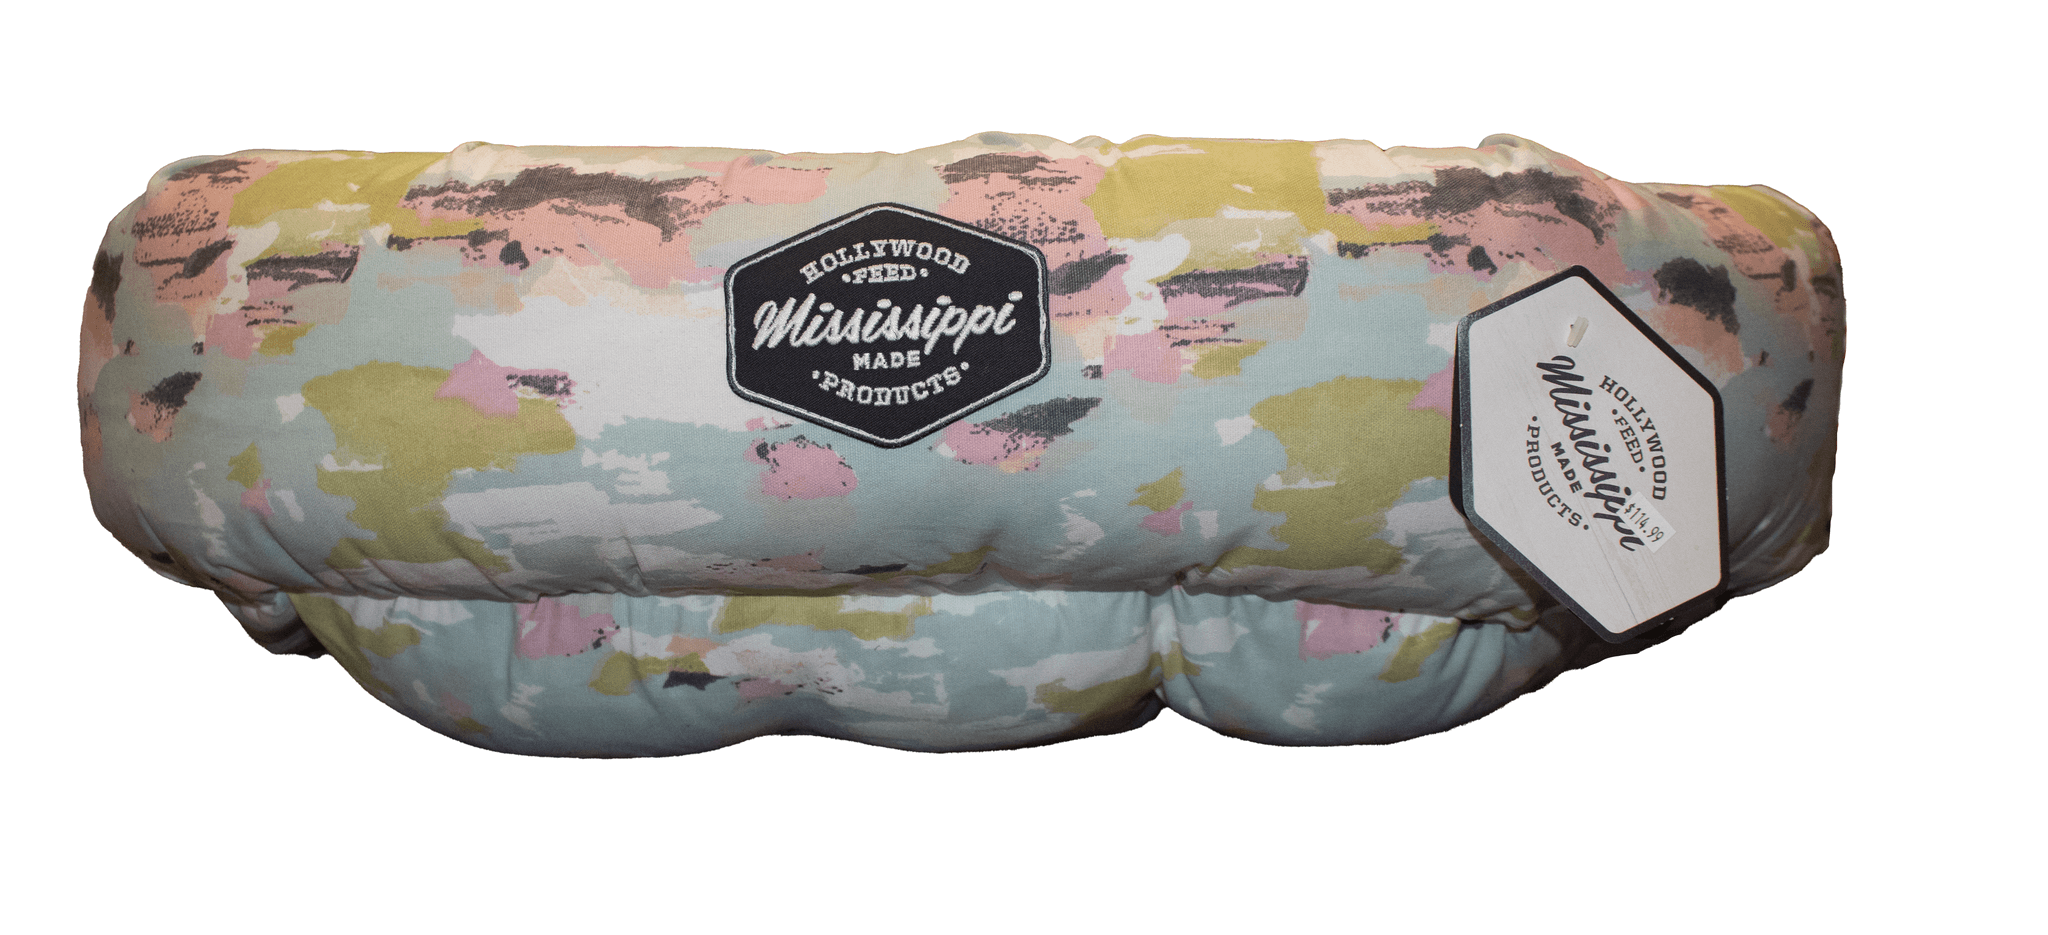 Hollywood feed mississippi made donut dog bed - limited edition cotton